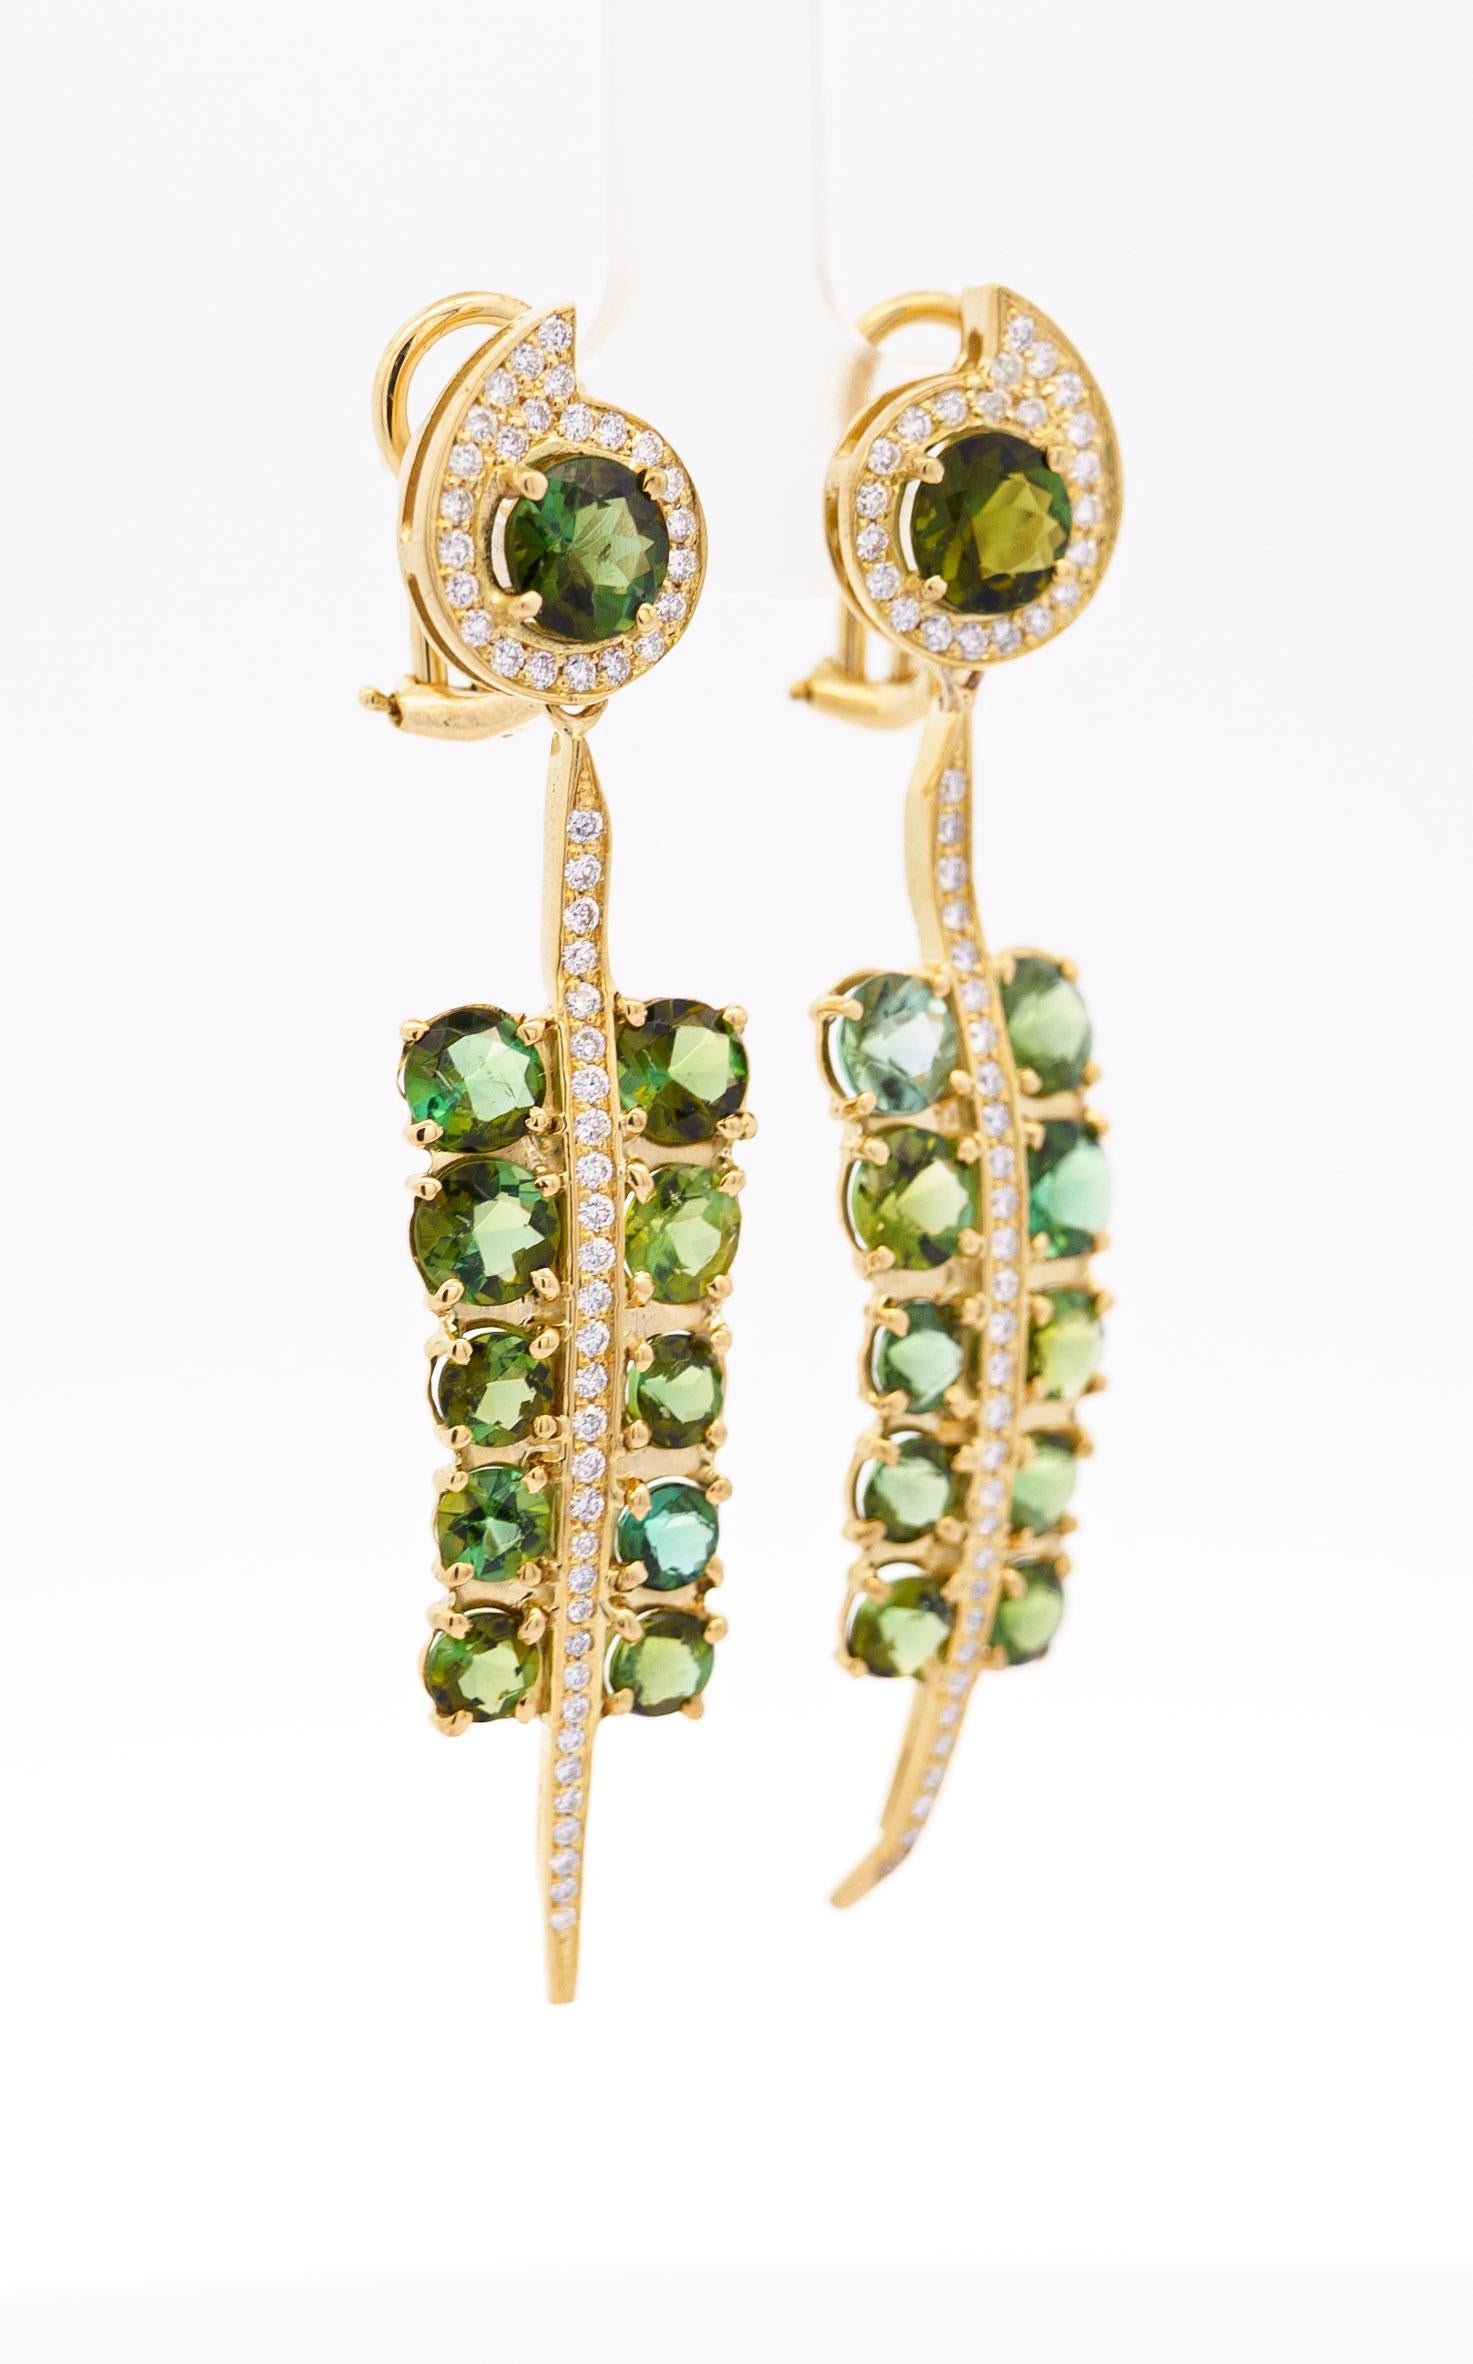 18k yellow gold dangle drop earrings, featuring a stunning 5 carats of oval round cut green tourmaline. The tourmaline gemstones are framed by white round diamonds, set in a  combination of prong and bezel settings. The tourmalines dangle from the